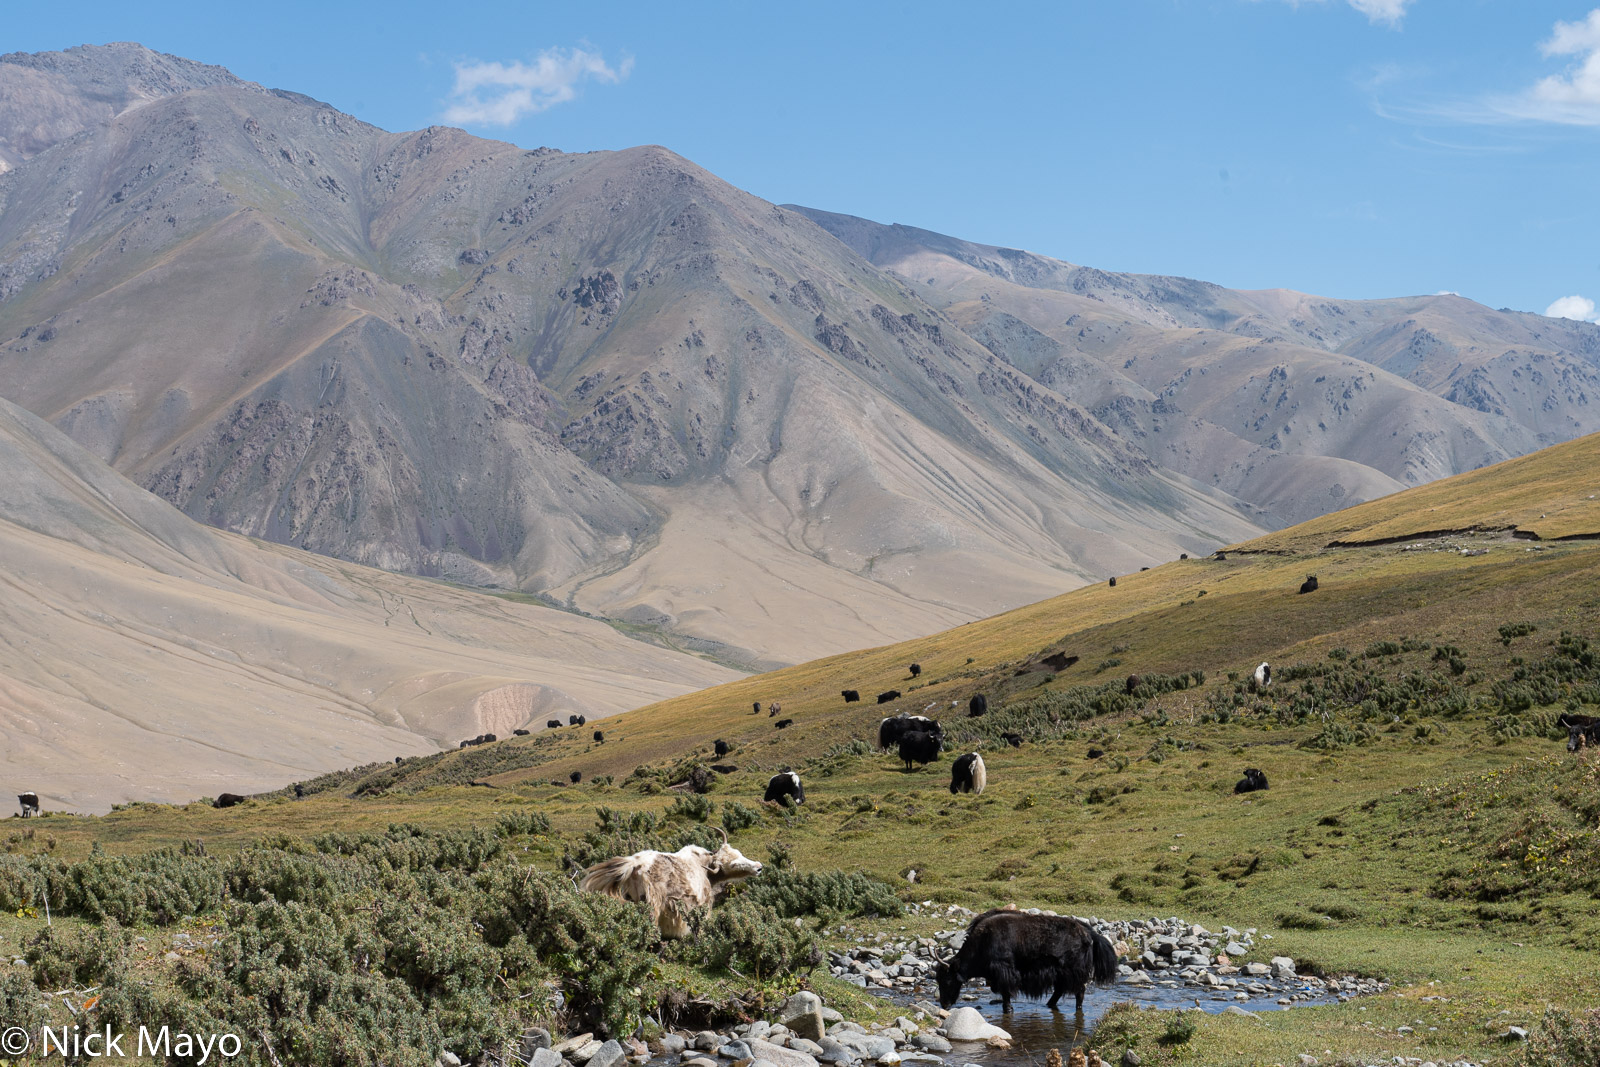 Dzo (yaks interbred with cattle) grazing above Tolok.